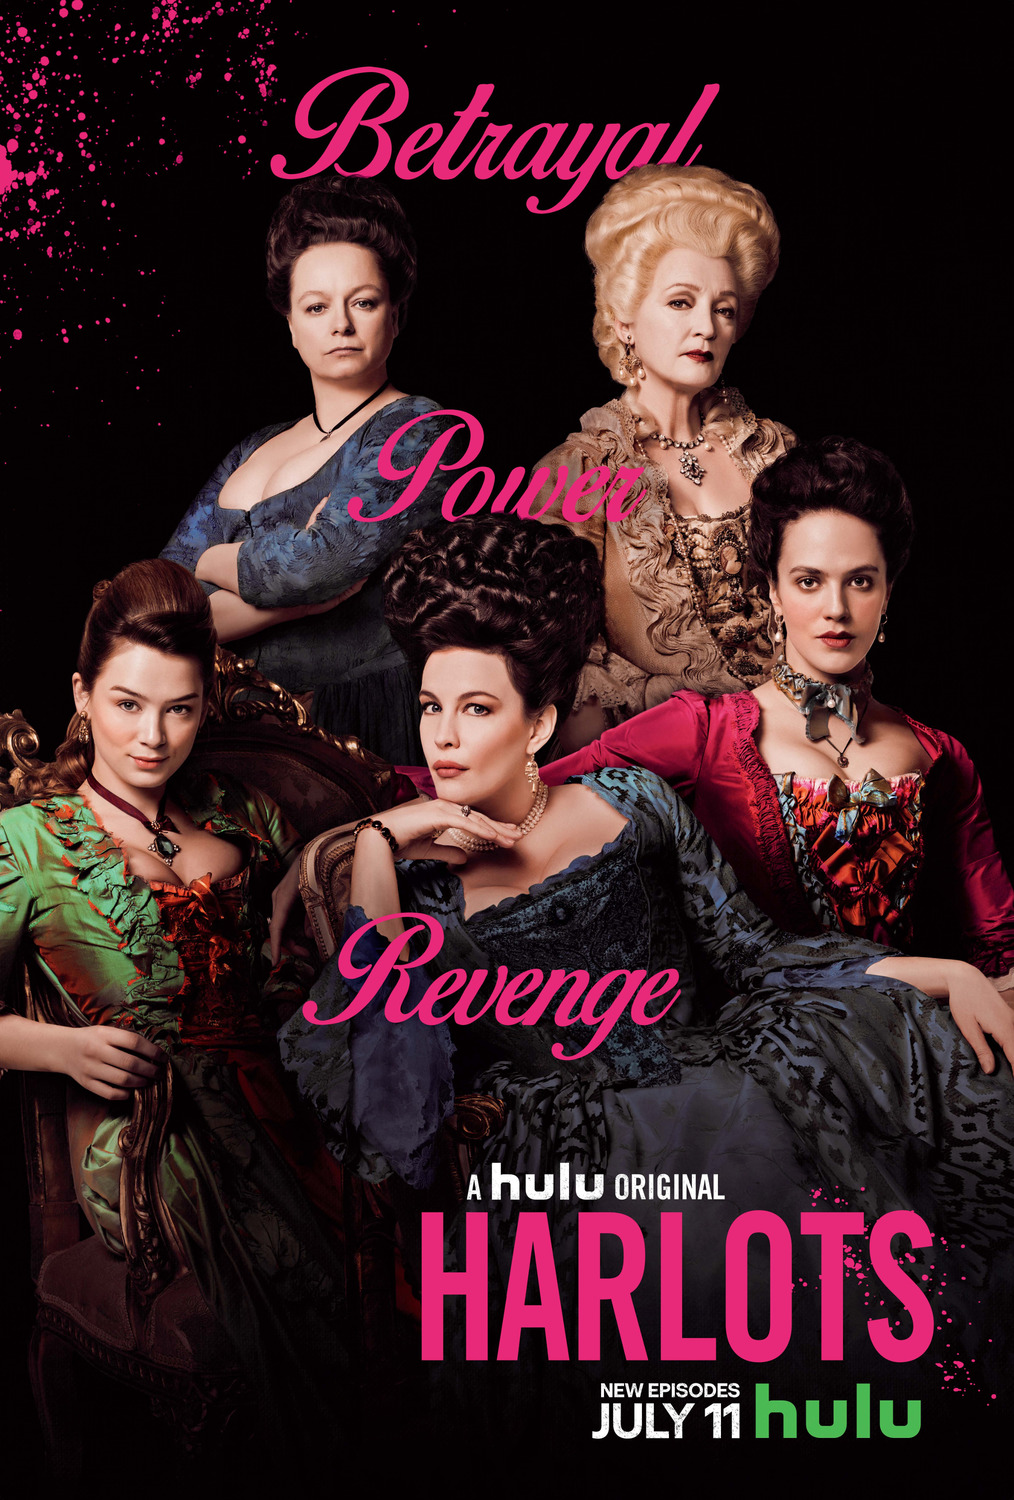 Extra Large TV Poster Image for Harlots (#2 of 2)